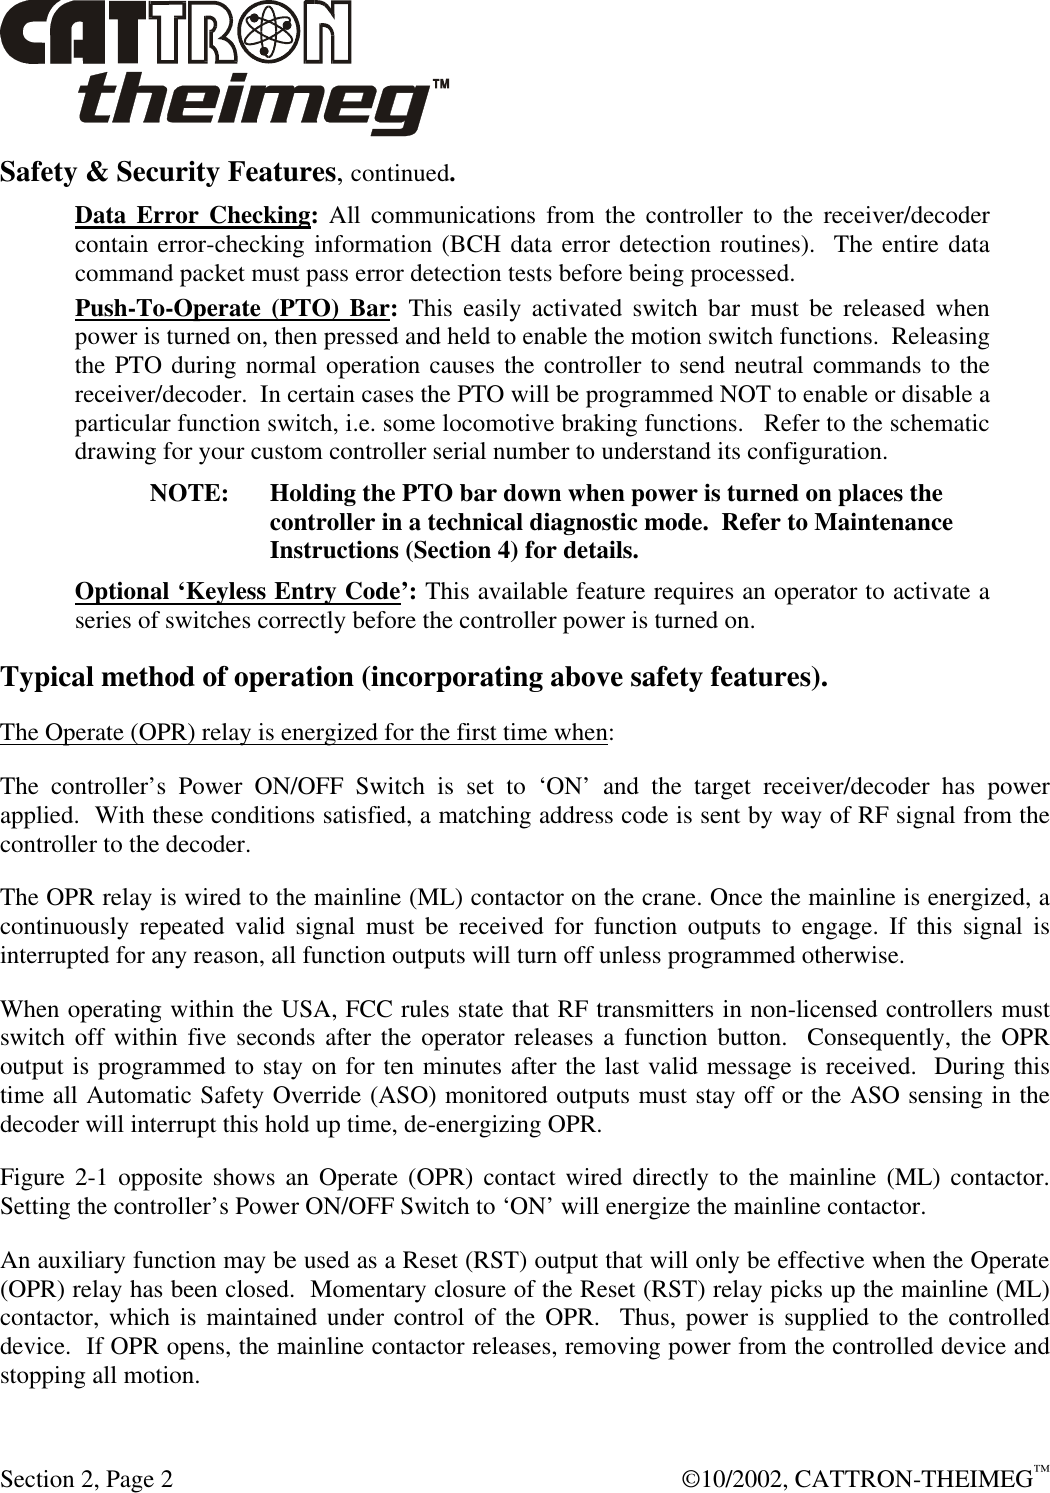  Section 2, Page 2  ©10/2002, CATTRON-THEIMEG™ Safety &amp; Security Features, continued. Data Error Checking: All communications from the controller to the receiver/decoder contain error-checking information (BCH data error detection routines).  The entire data command packet must pass error detection tests before being processed. Push-To-Operate (PTO) Bar: This easily activated switch bar must be released when power is turned on, then pressed and held to enable the motion switch functions.  Releasing the PTO during normal operation causes the controller to send neutral commands to the receiver/decoder.  In certain cases the PTO will be programmed NOT to enable or disable a particular function switch, i.e. some locomotive braking functions.   Refer to the schematic drawing for your custom controller serial number to understand its configuration. NOTE: Holding the PTO bar down when power is turned on places the controller in a technical diagnostic mode.  Refer to Maintenance Instructions (Section 4) for details. Optional ‘Keyless Entry Code’: This available feature requires an operator to activate a series of switches correctly before the controller power is turned on. Typical method of operation (incorporating above safety features). The Operate (OPR) relay is energized for the first time when: The controller’s Power ON/OFF Switch is set to ‘ON’ and the target receiver/decoder has power applied.  With these conditions satisfied, a matching address code is sent by way of RF signal from the controller to the decoder. The OPR relay is wired to the mainline (ML) contactor on the crane. Once the mainline is energized, a continuously repeated valid signal must be received for function outputs to engage. If this signal is interrupted for any reason, all function outputs will turn off unless programmed otherwise.  When operating within the USA, FCC rules state that RF transmitters in non-licensed controllers must switch off within five seconds after the operator releases a function button.  Consequently, the OPR output is programmed to stay on for ten minutes after the last valid message is received.  During this time all Automatic Safety Override (ASO) monitored outputs must stay off or the ASO sensing in the decoder will interrupt this hold up time, de-energizing OPR. Figure 2-1 opposite shows an Operate (OPR) contact wired directly to the mainline (ML) contactor. Setting the controller’s Power ON/OFF Switch to ‘ON’ will energize the mainline contactor. An auxiliary function may be used as a Reset (RST) output that will only be effective when the Operate (OPR) relay has been closed.  Momentary closure of the Reset (RST) relay picks up the mainline (ML) contactor, which is maintained under control of the OPR.  Thus, power is supplied to the controlled device.  If OPR opens, the mainline contactor releases, removing power from the controlled device and stopping all motion. 